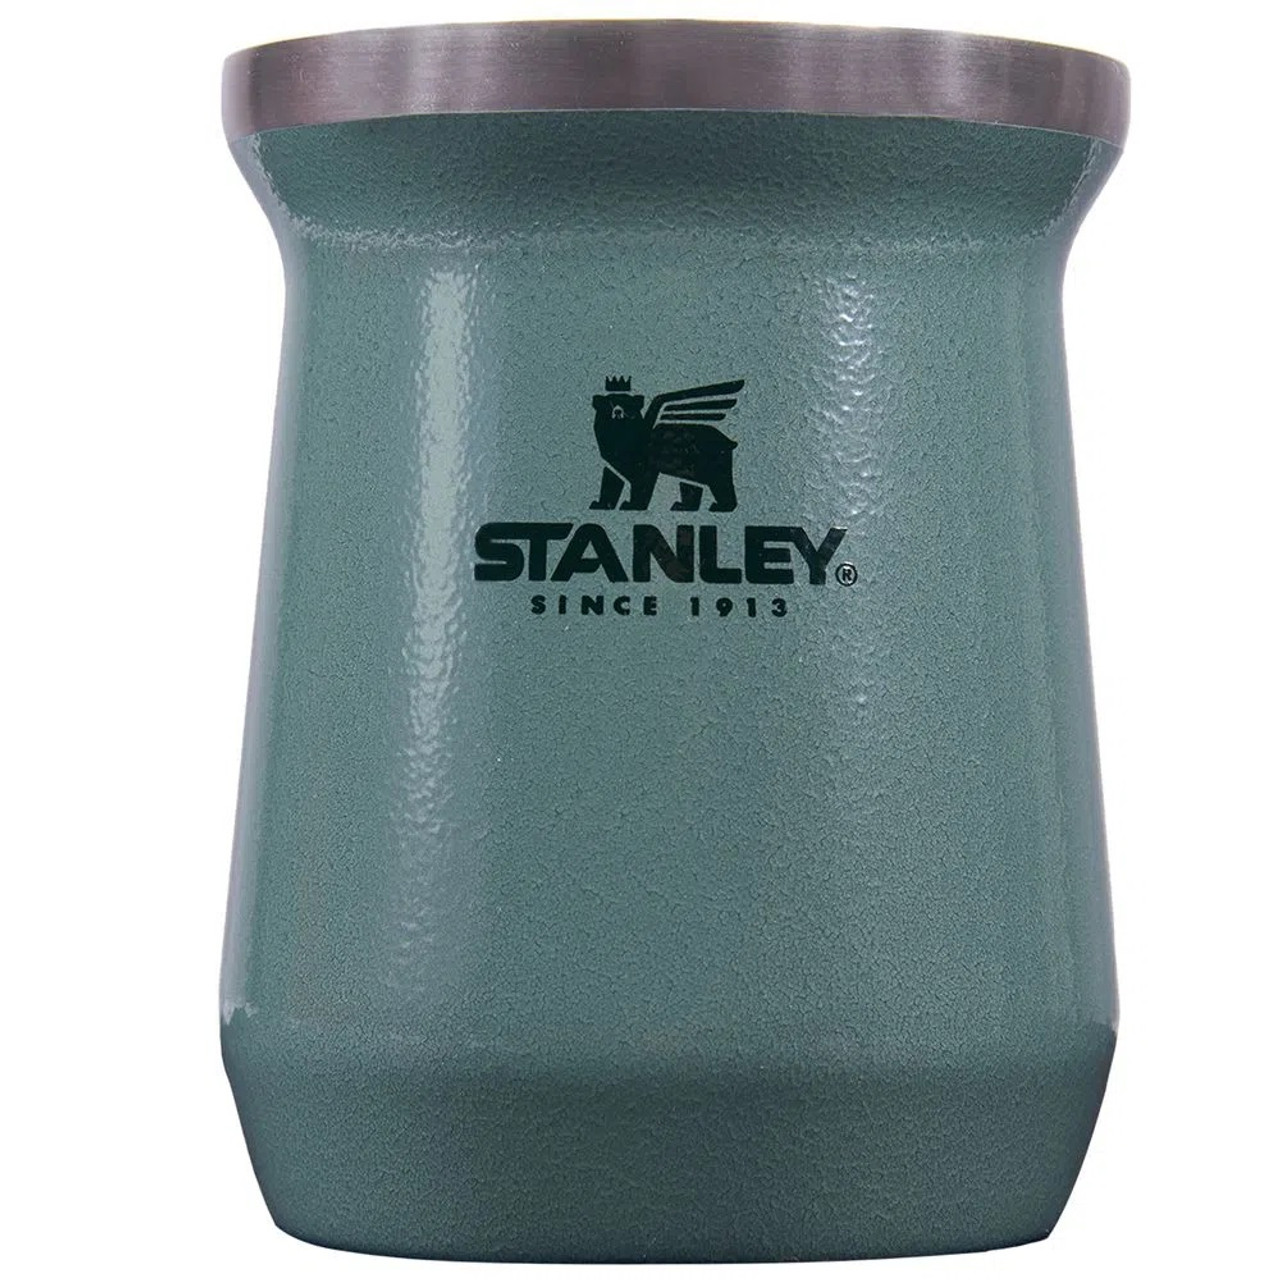 Stanley Mate System Review🧉🤔 For the price, I wouldn't recommend it., Yerba Mate